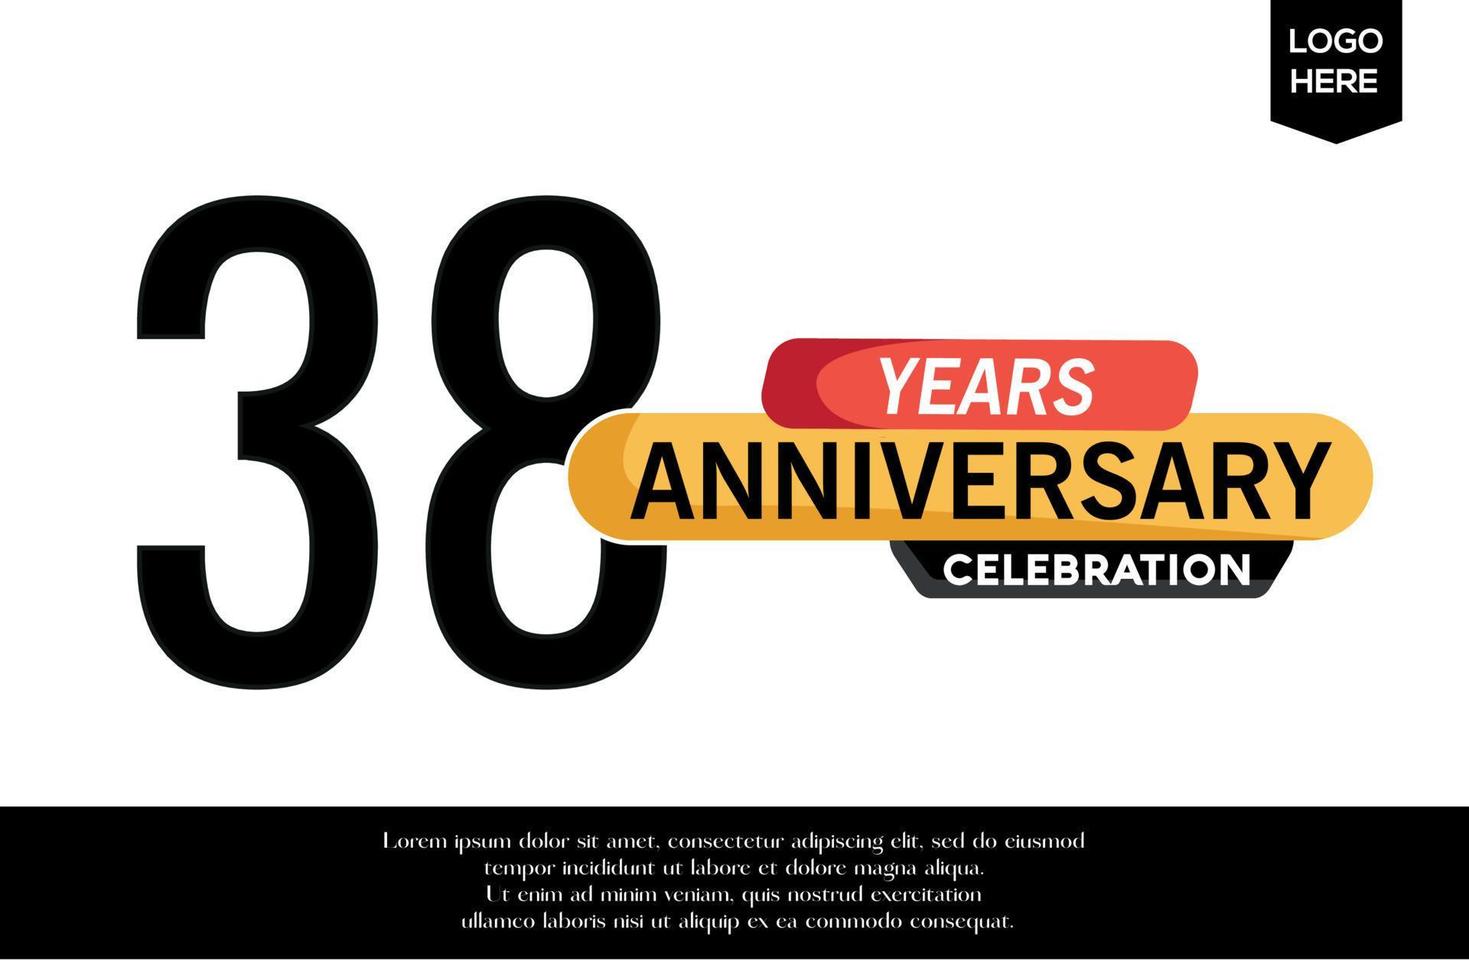 38th anniversary celebration logotype black yellow colored with text in gray color isolated on white background vector template design